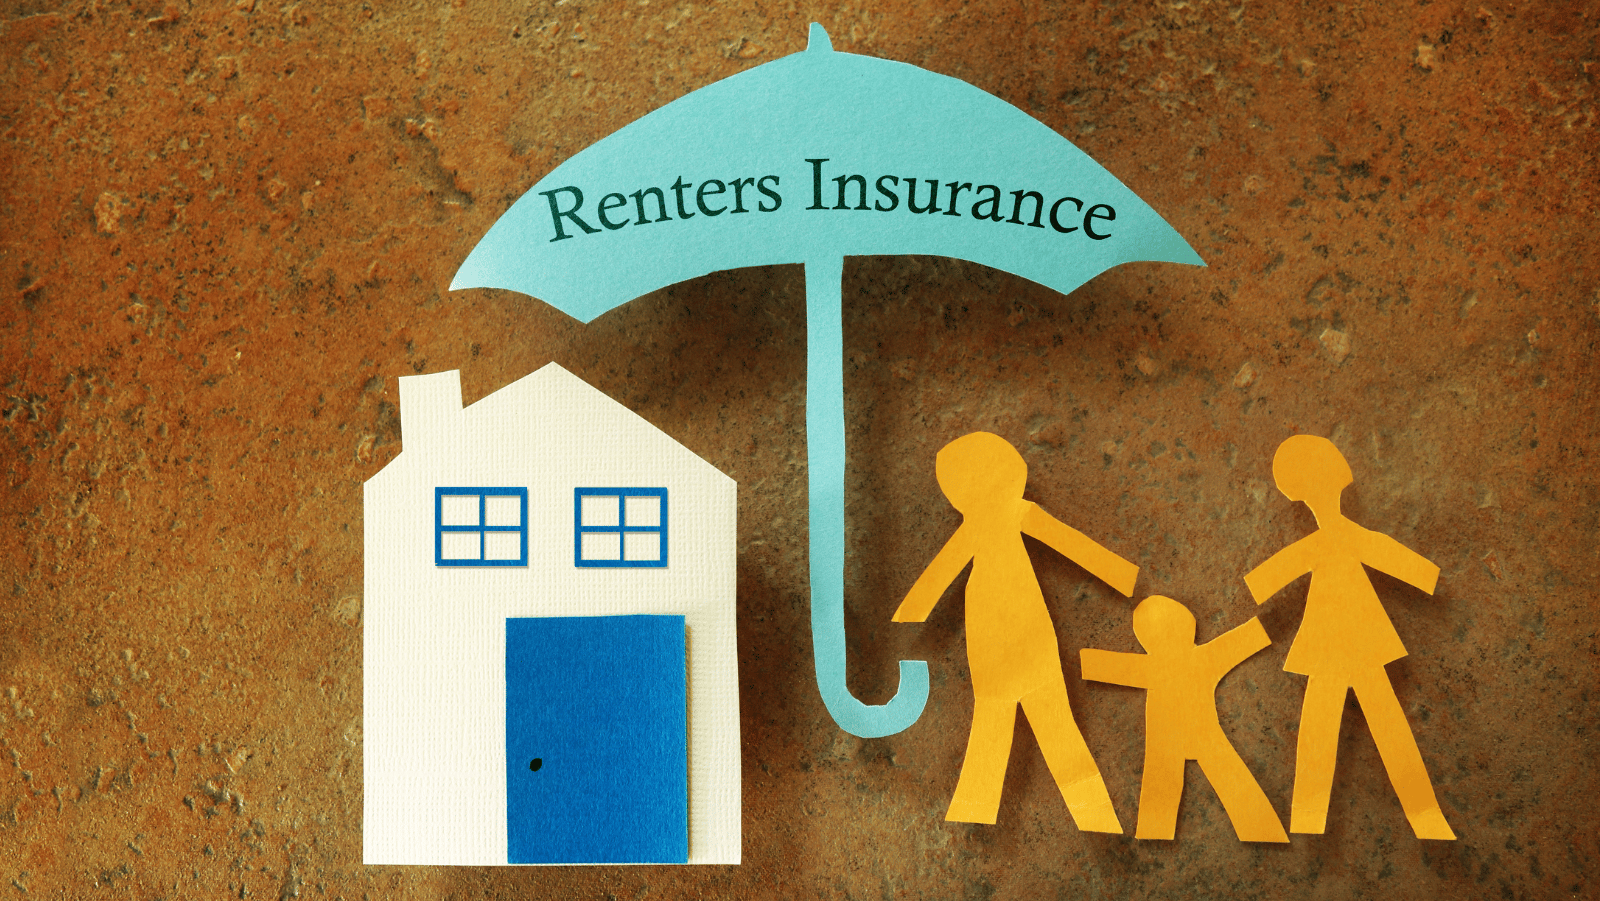 Does Renters Insurance Cover Theft - Everything You Need to Know about Renters Insurance